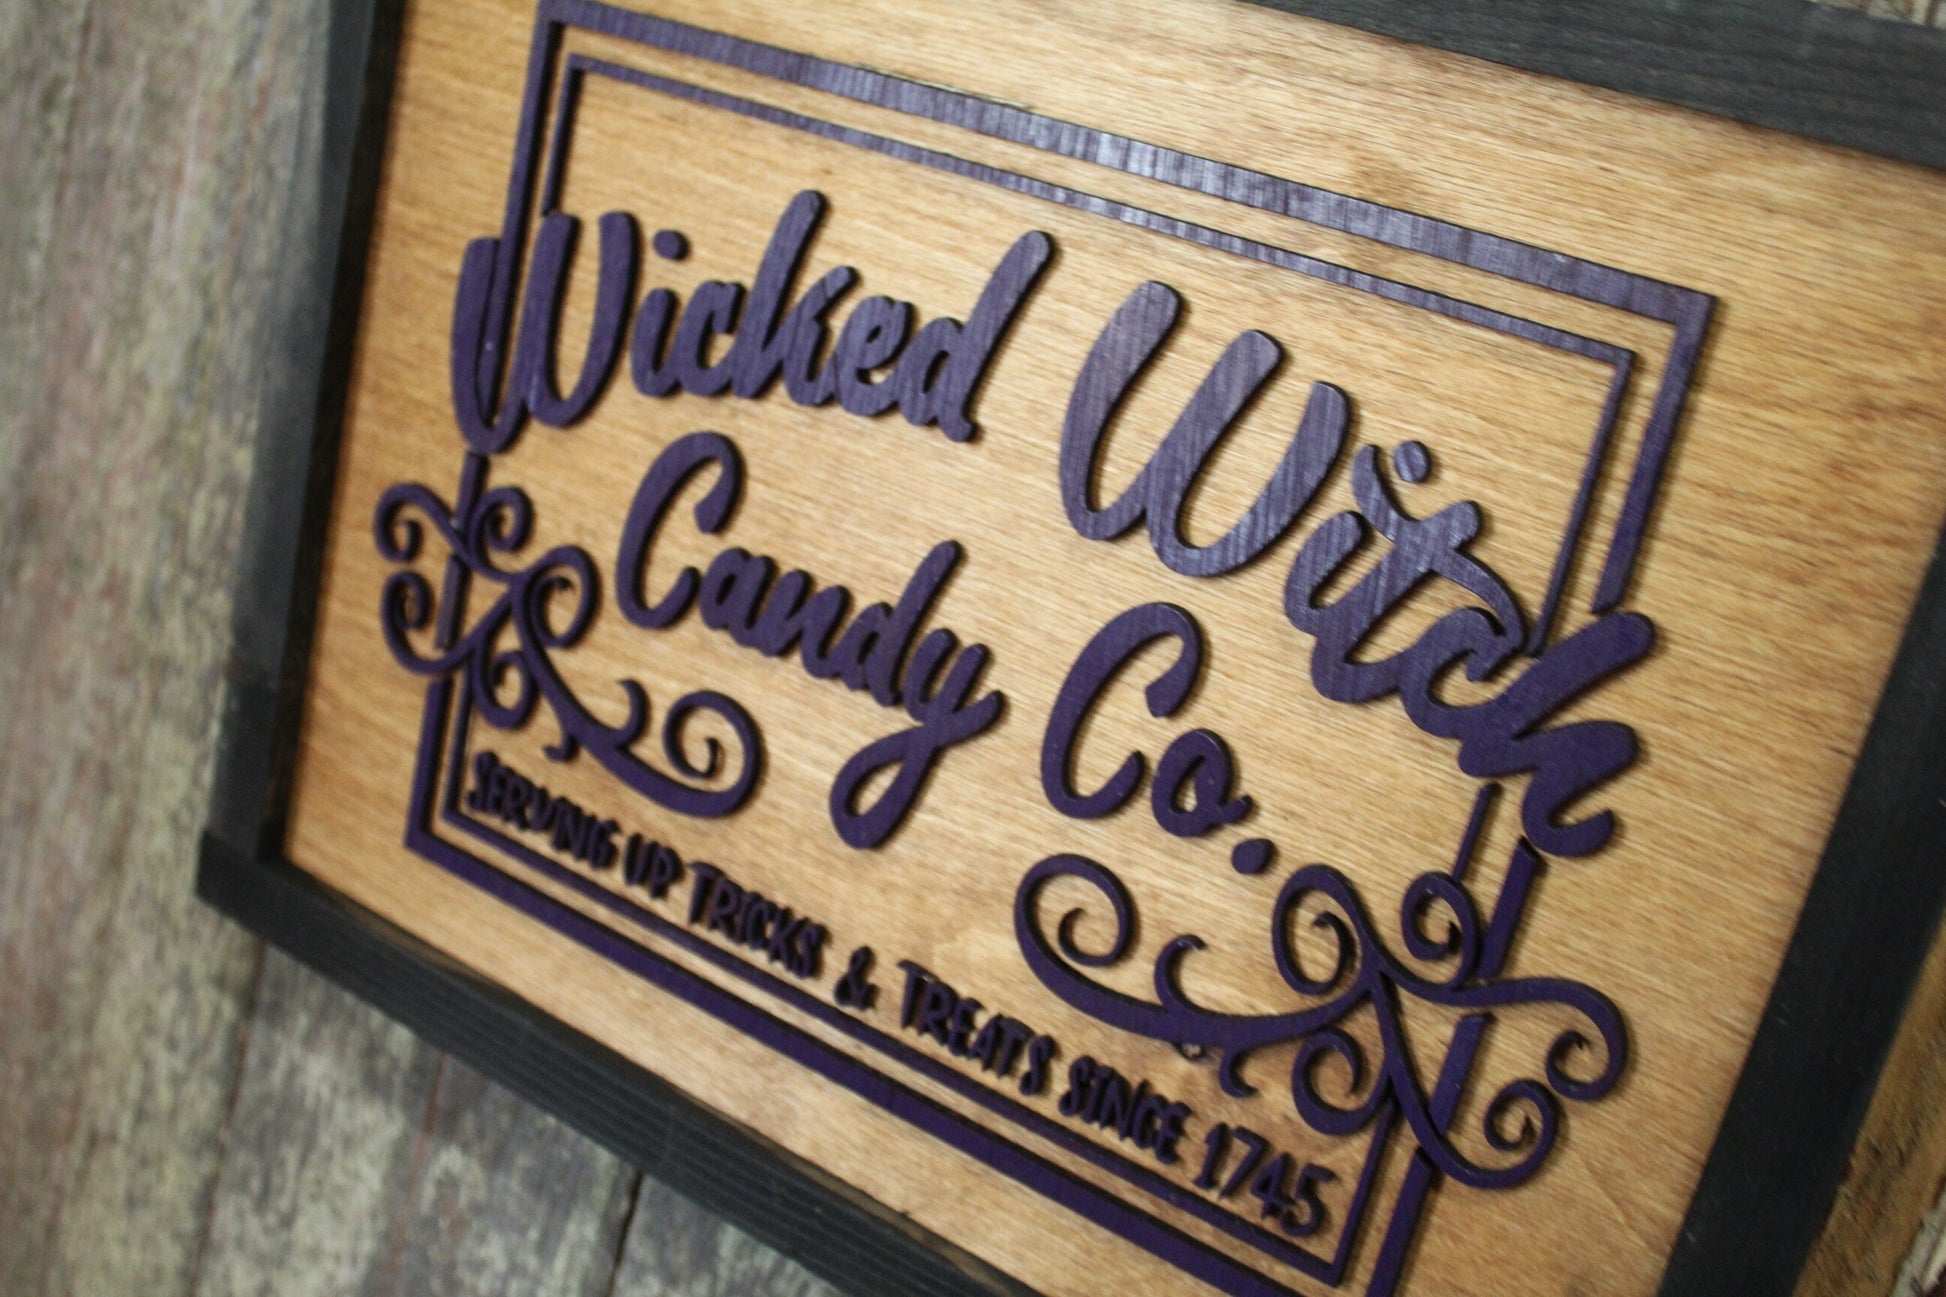 Wicked Witch Candy Company Wood Sign Serving Up Tricks and Treats Halloween Scary 3D Raised Text Country Farmhouse Cabin Decor Fall